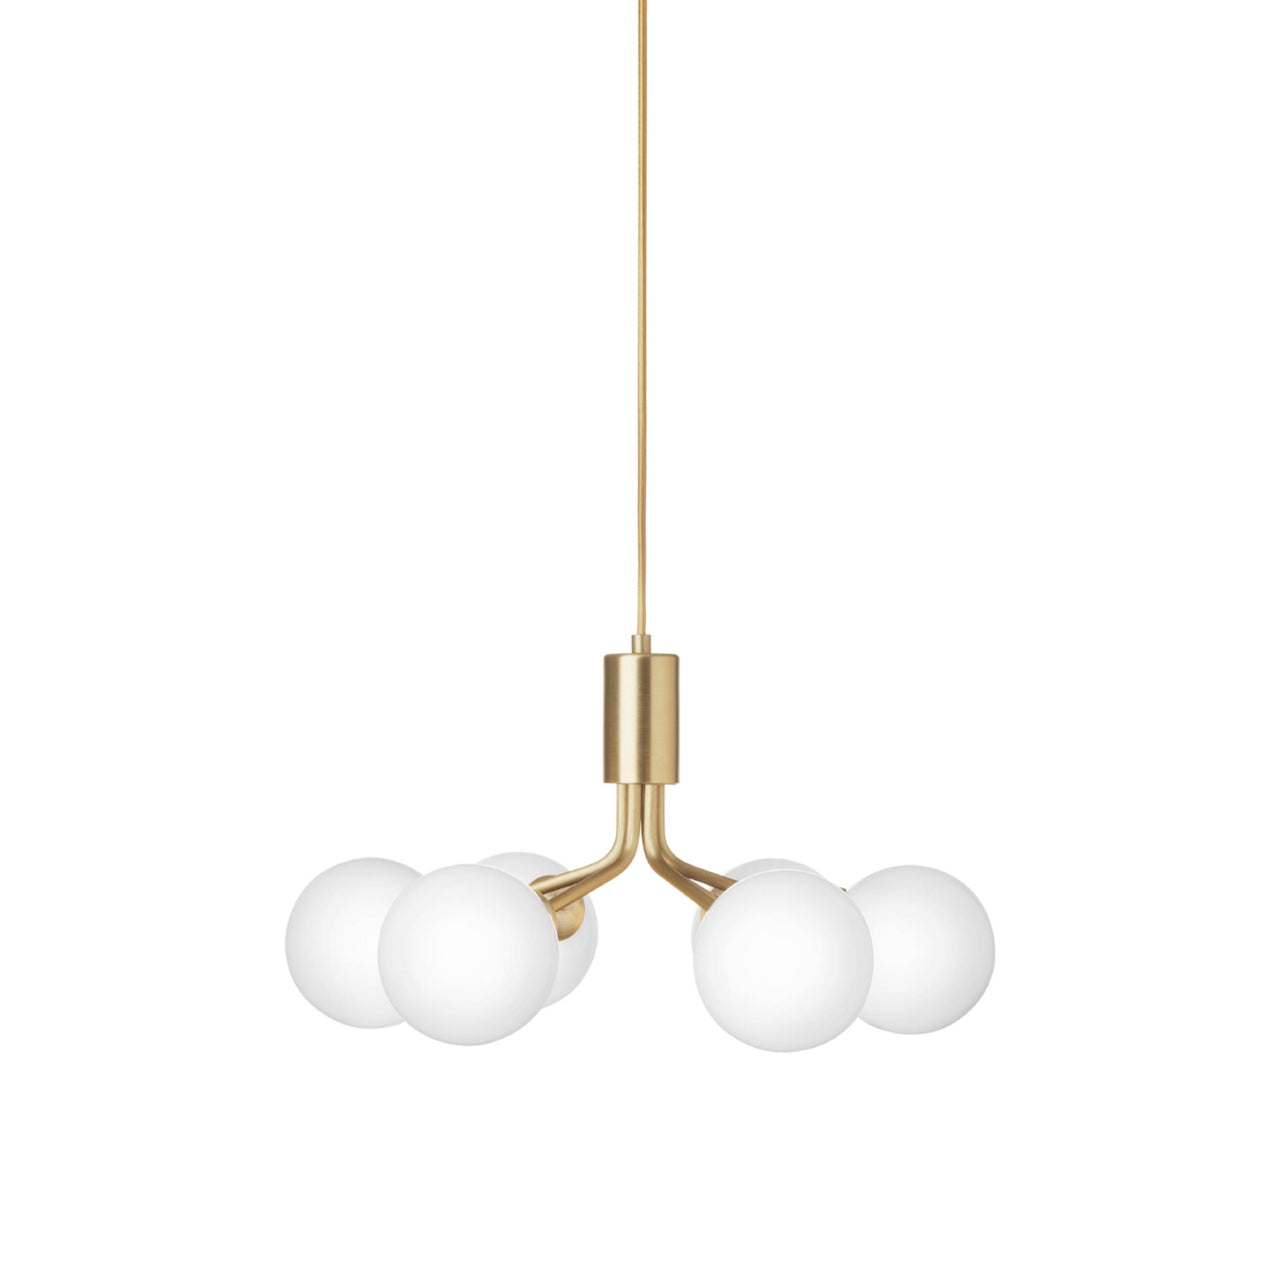 Apiales 6 Pendant Light: Brushed Brass + Opal White + Gold